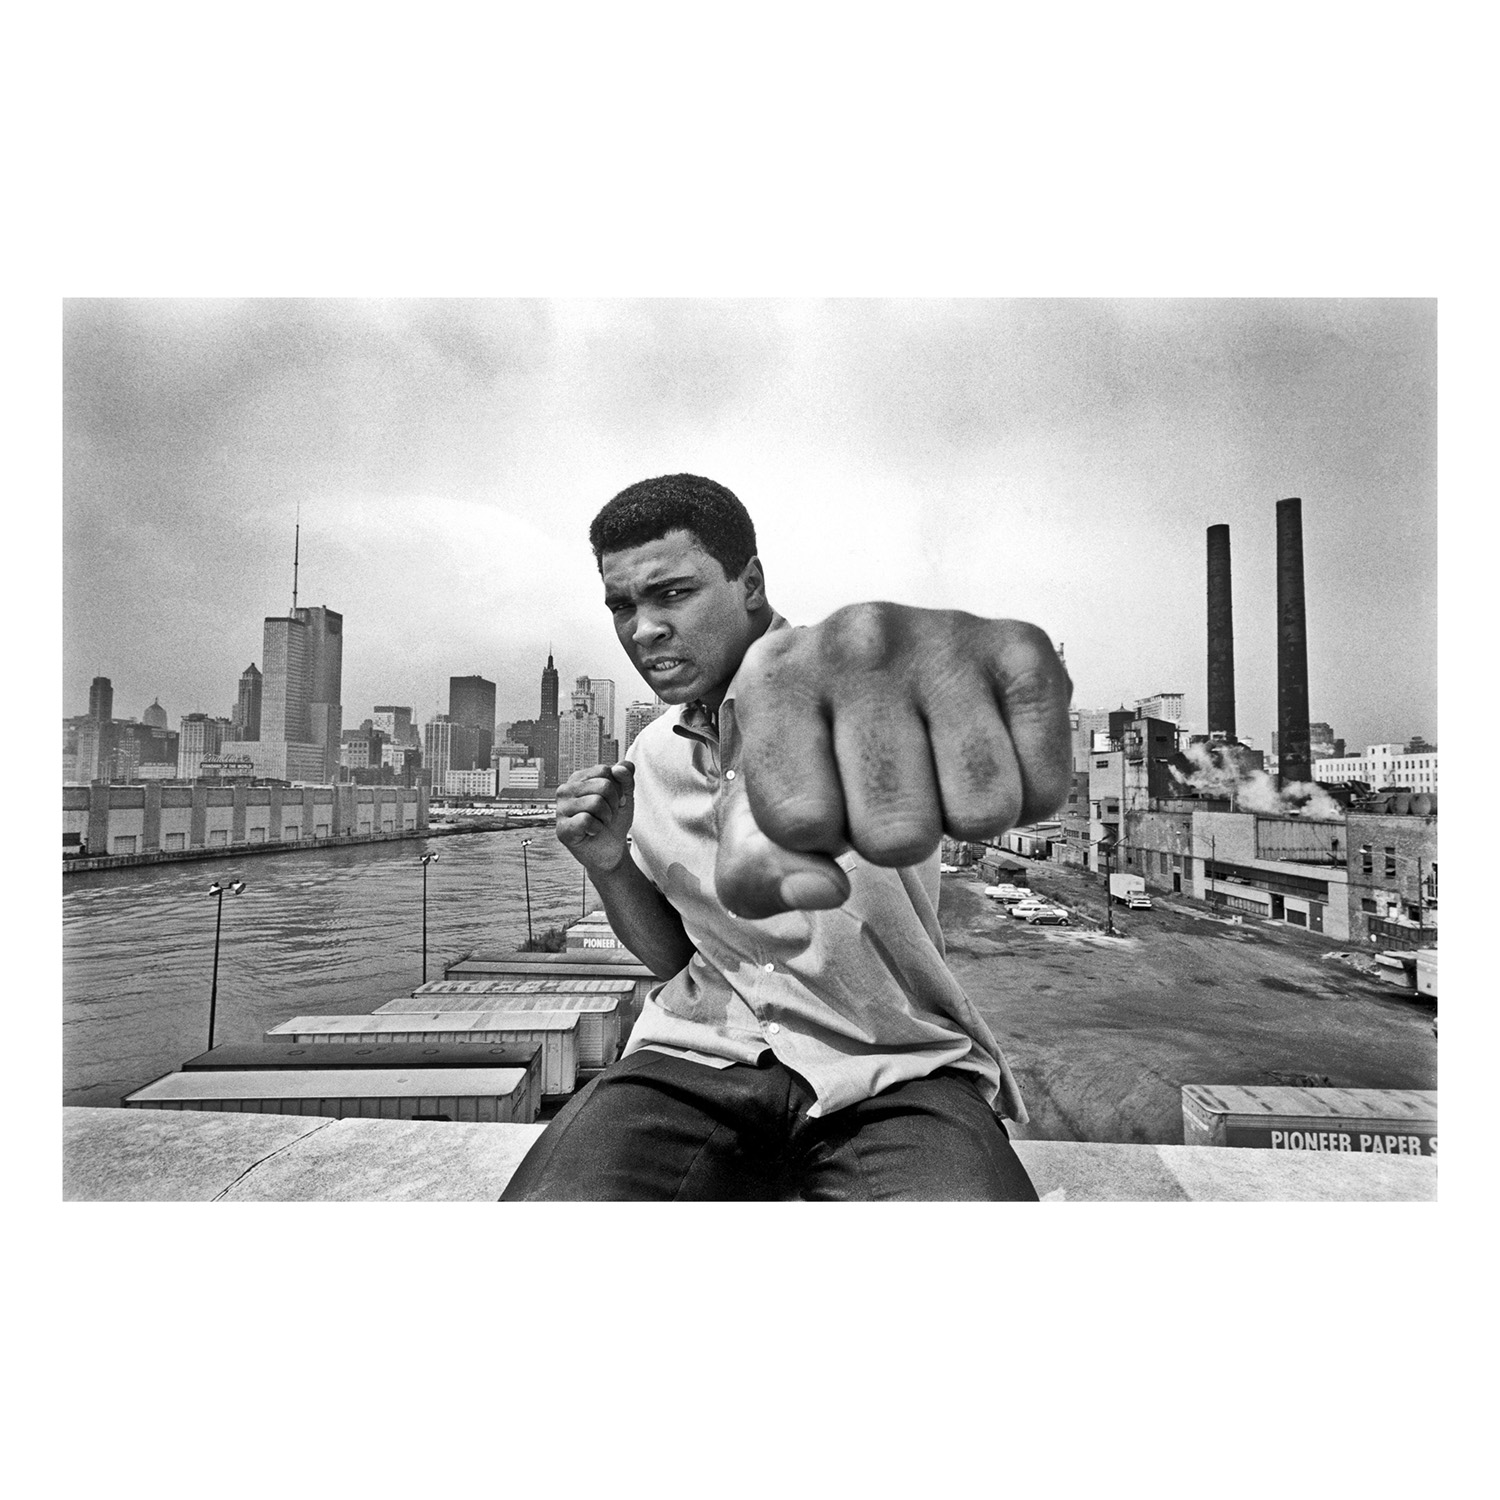 USA. Chicago, Illinois. 1966. Muhammad ALI on a bridge overlooking the Chicago River and the city's skyline.